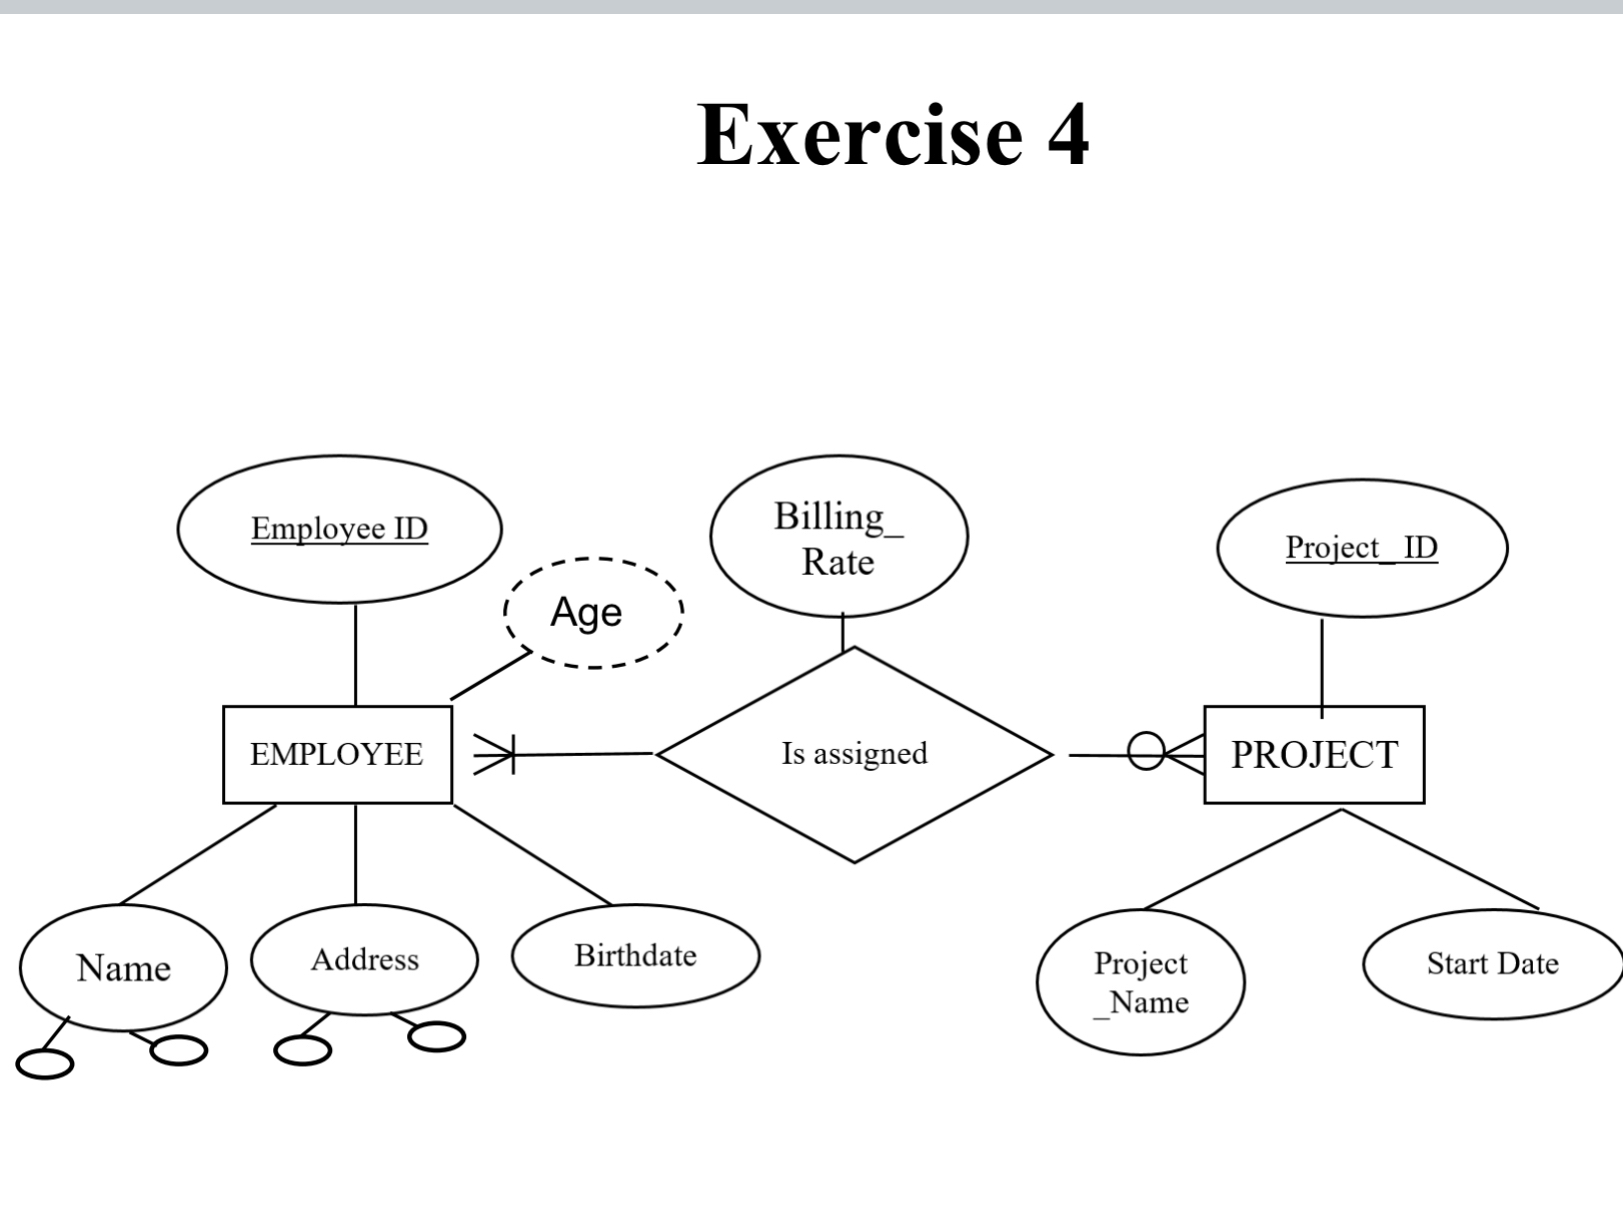 Draw A Relational Schema For Each Excercise 3479